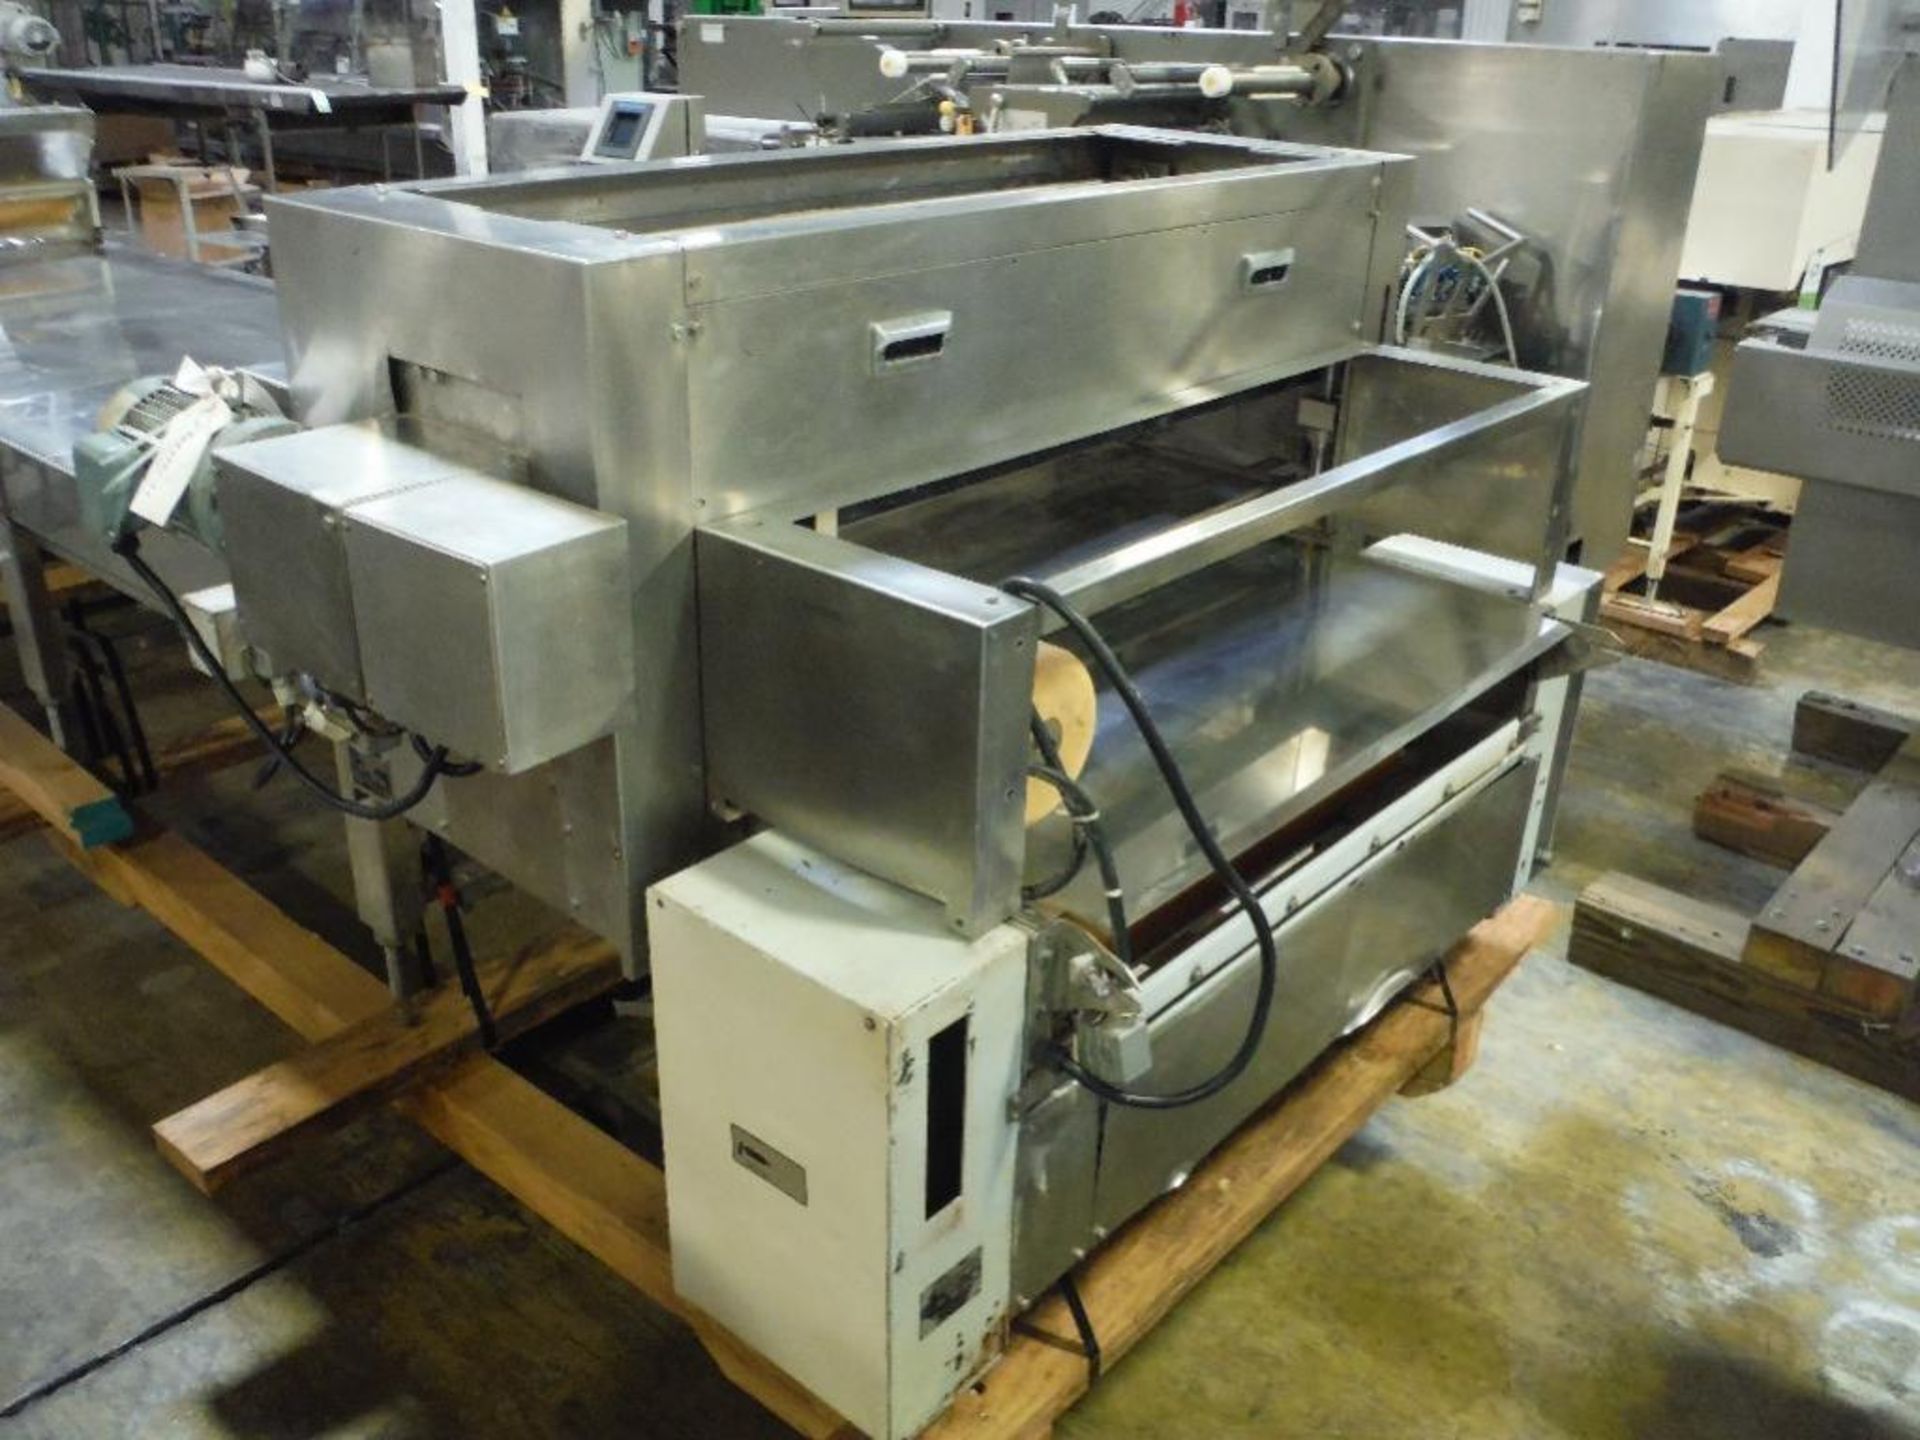 1991 Rheon sheeting conveyor, Model PC213, SN 00011, 180 in. long x 42 in. wide, with 1991 Rheon dou - Image 8 of 16